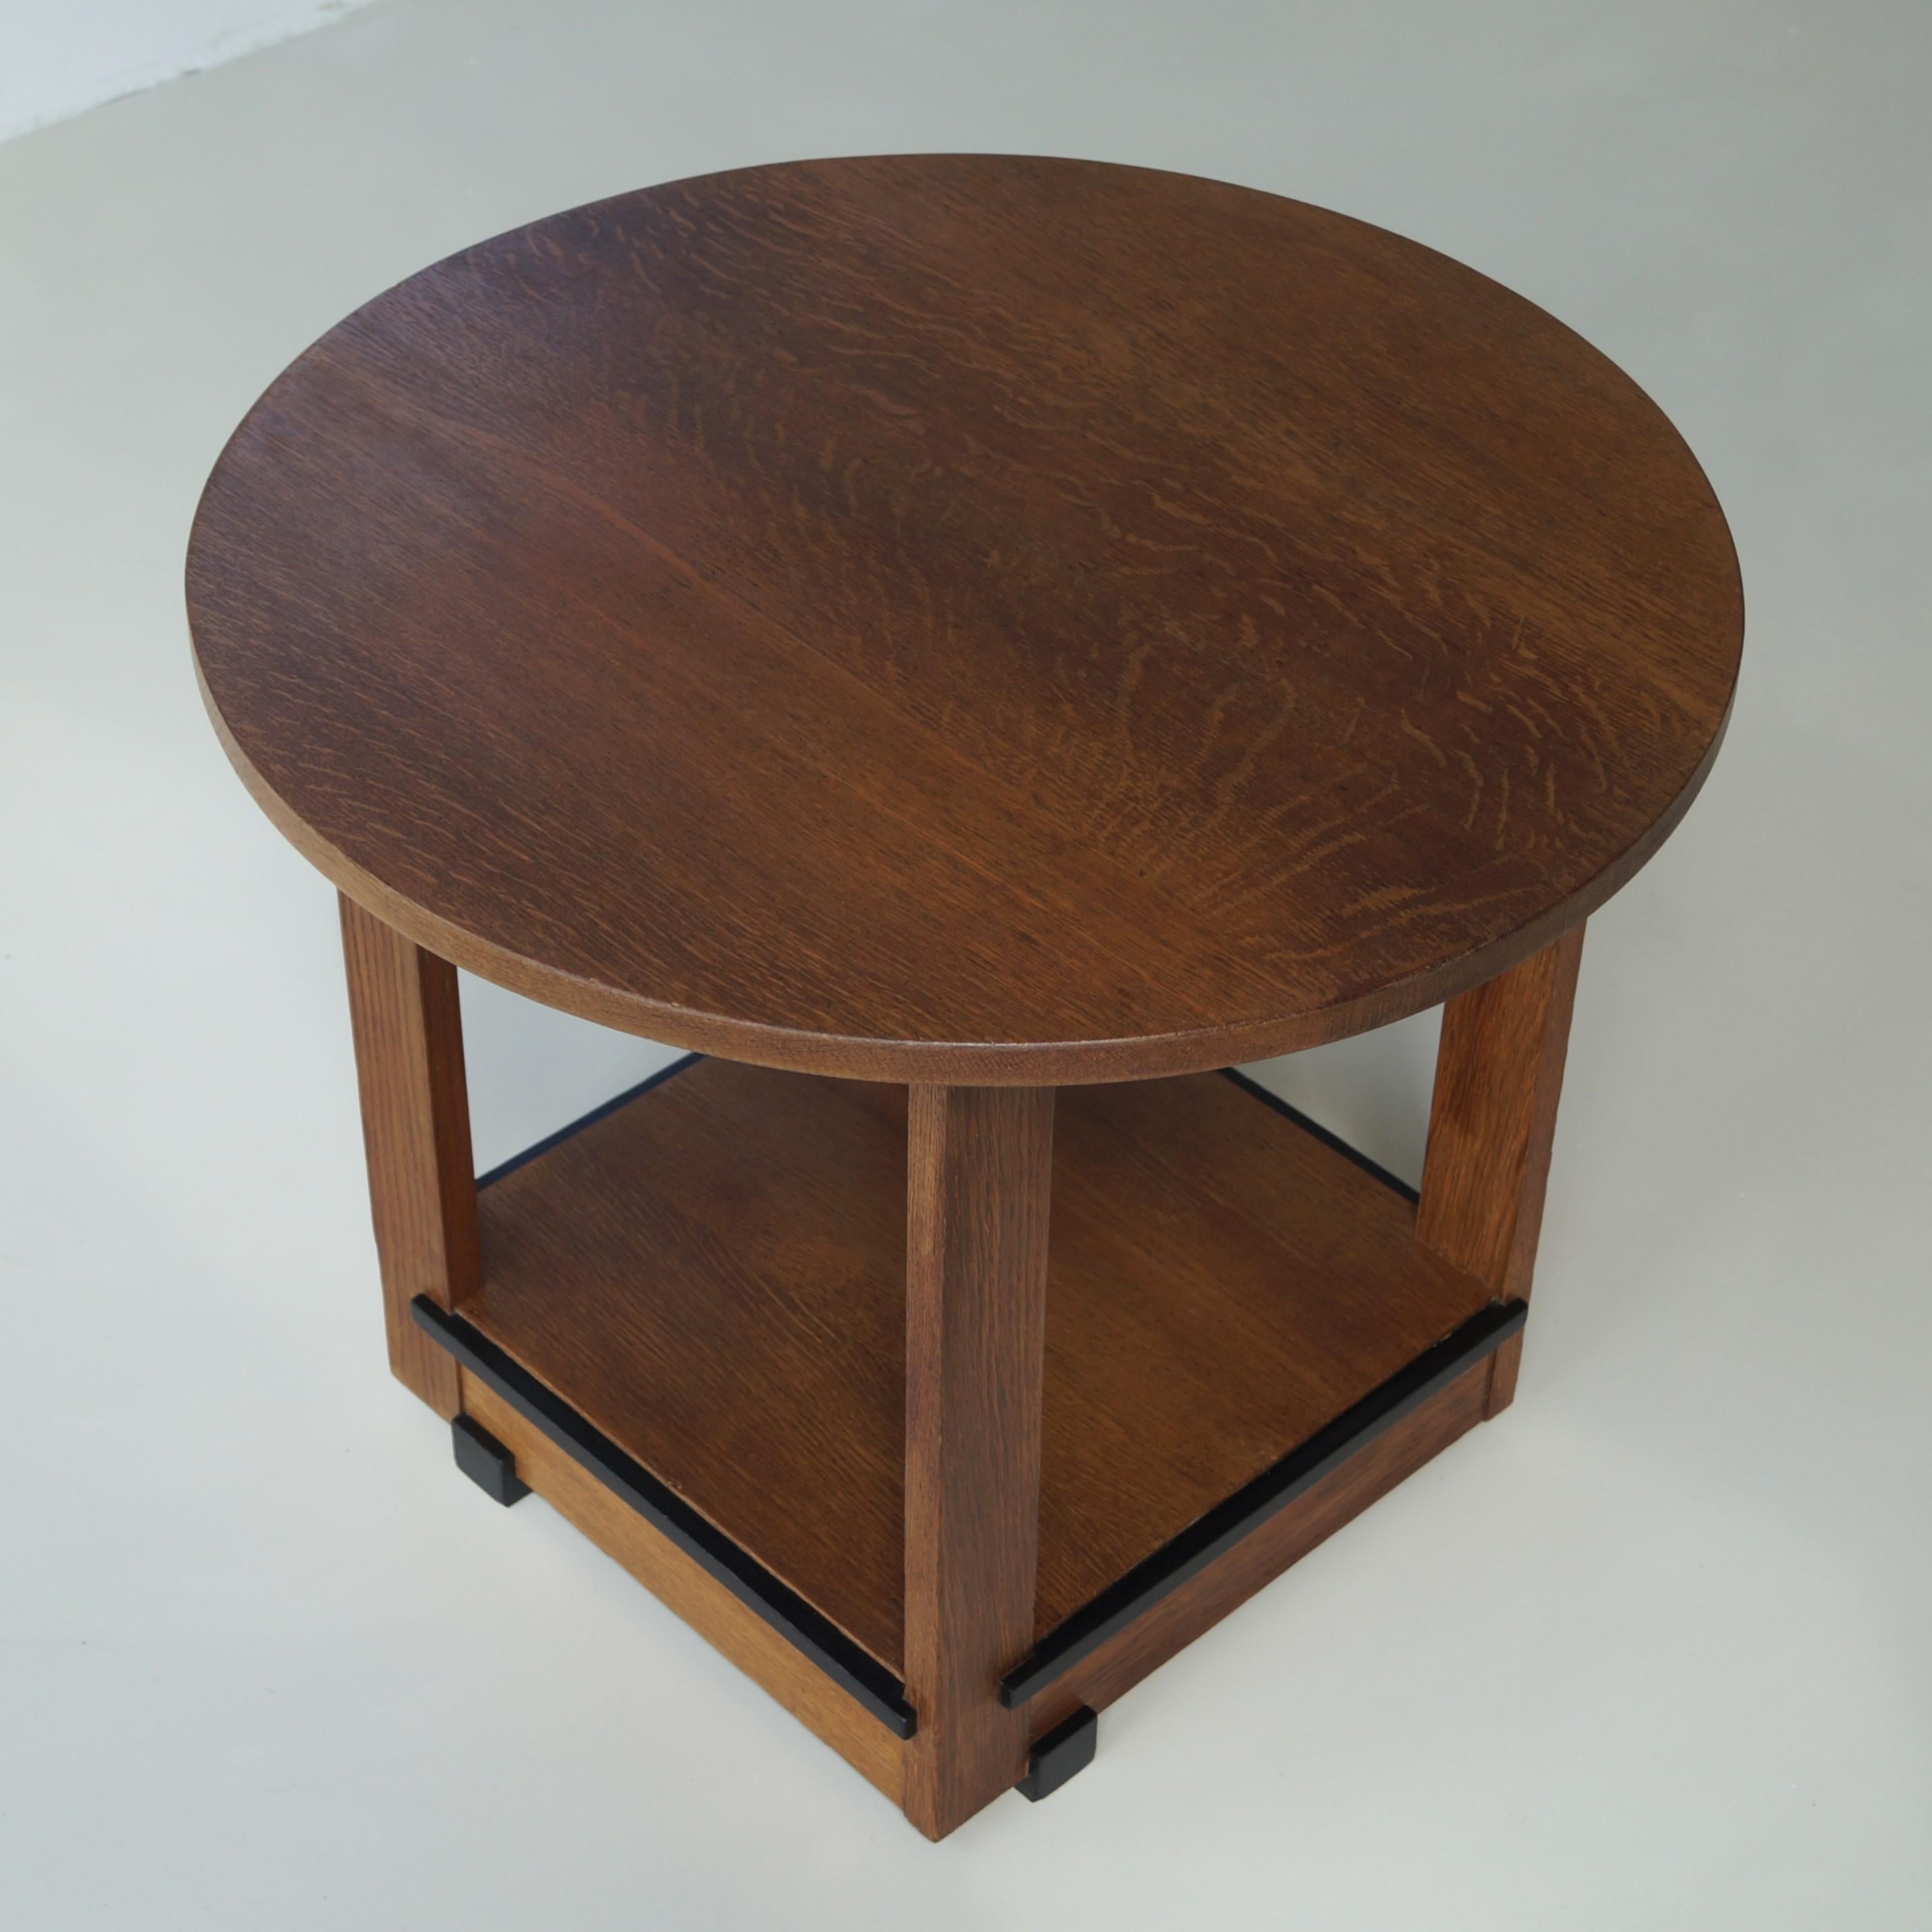 Modernist Dutch Art Deco occasional table attributed to Jan Brunott, 1920s For Sale 4